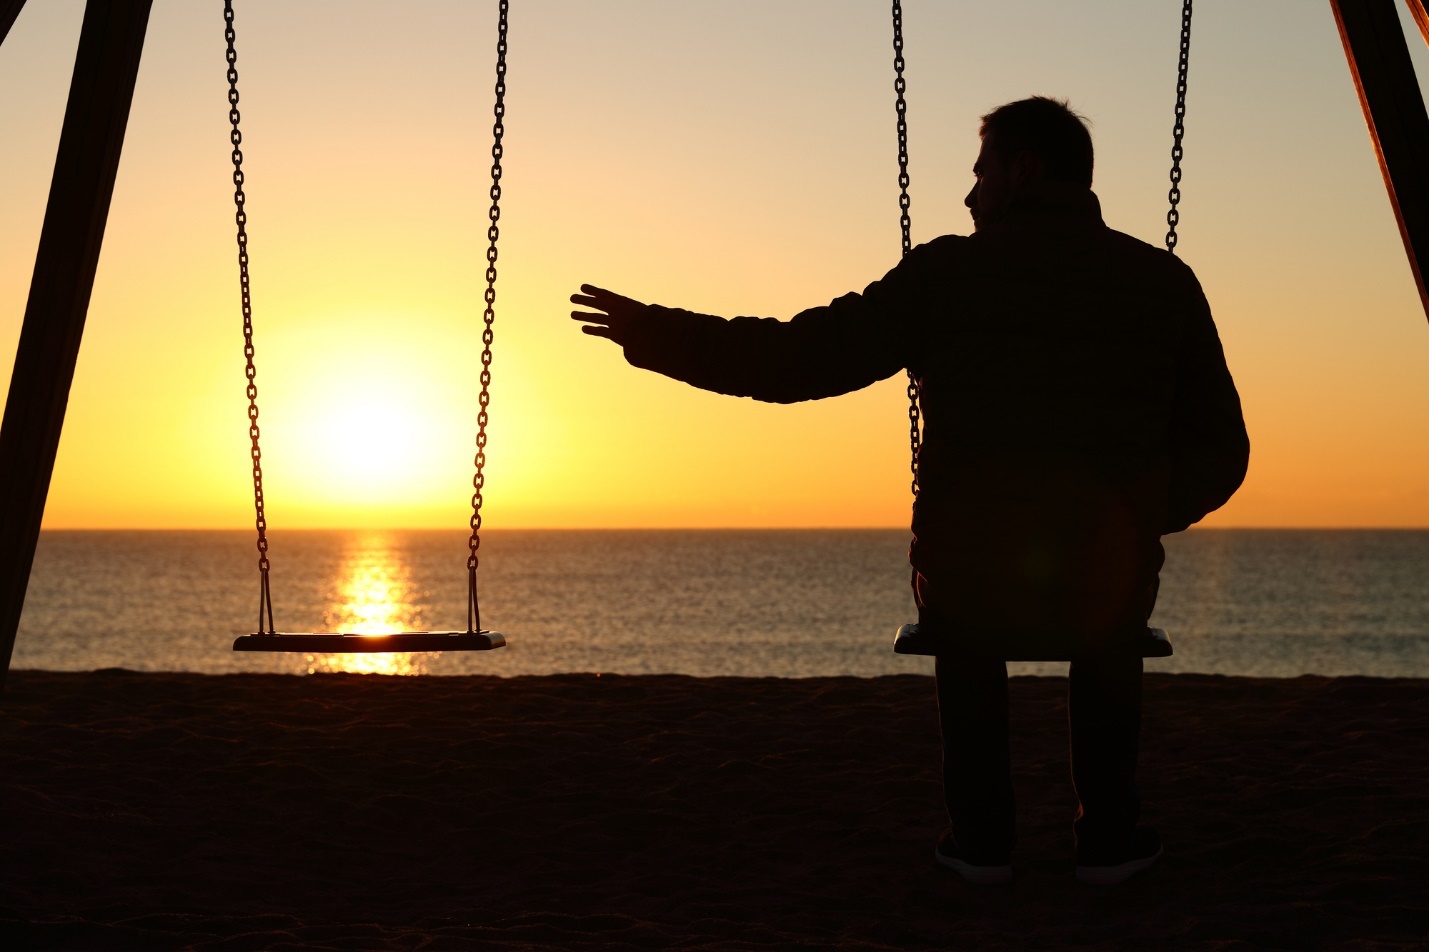 A person sitting on a swing at sunset

Description automatically generated with medium confidence